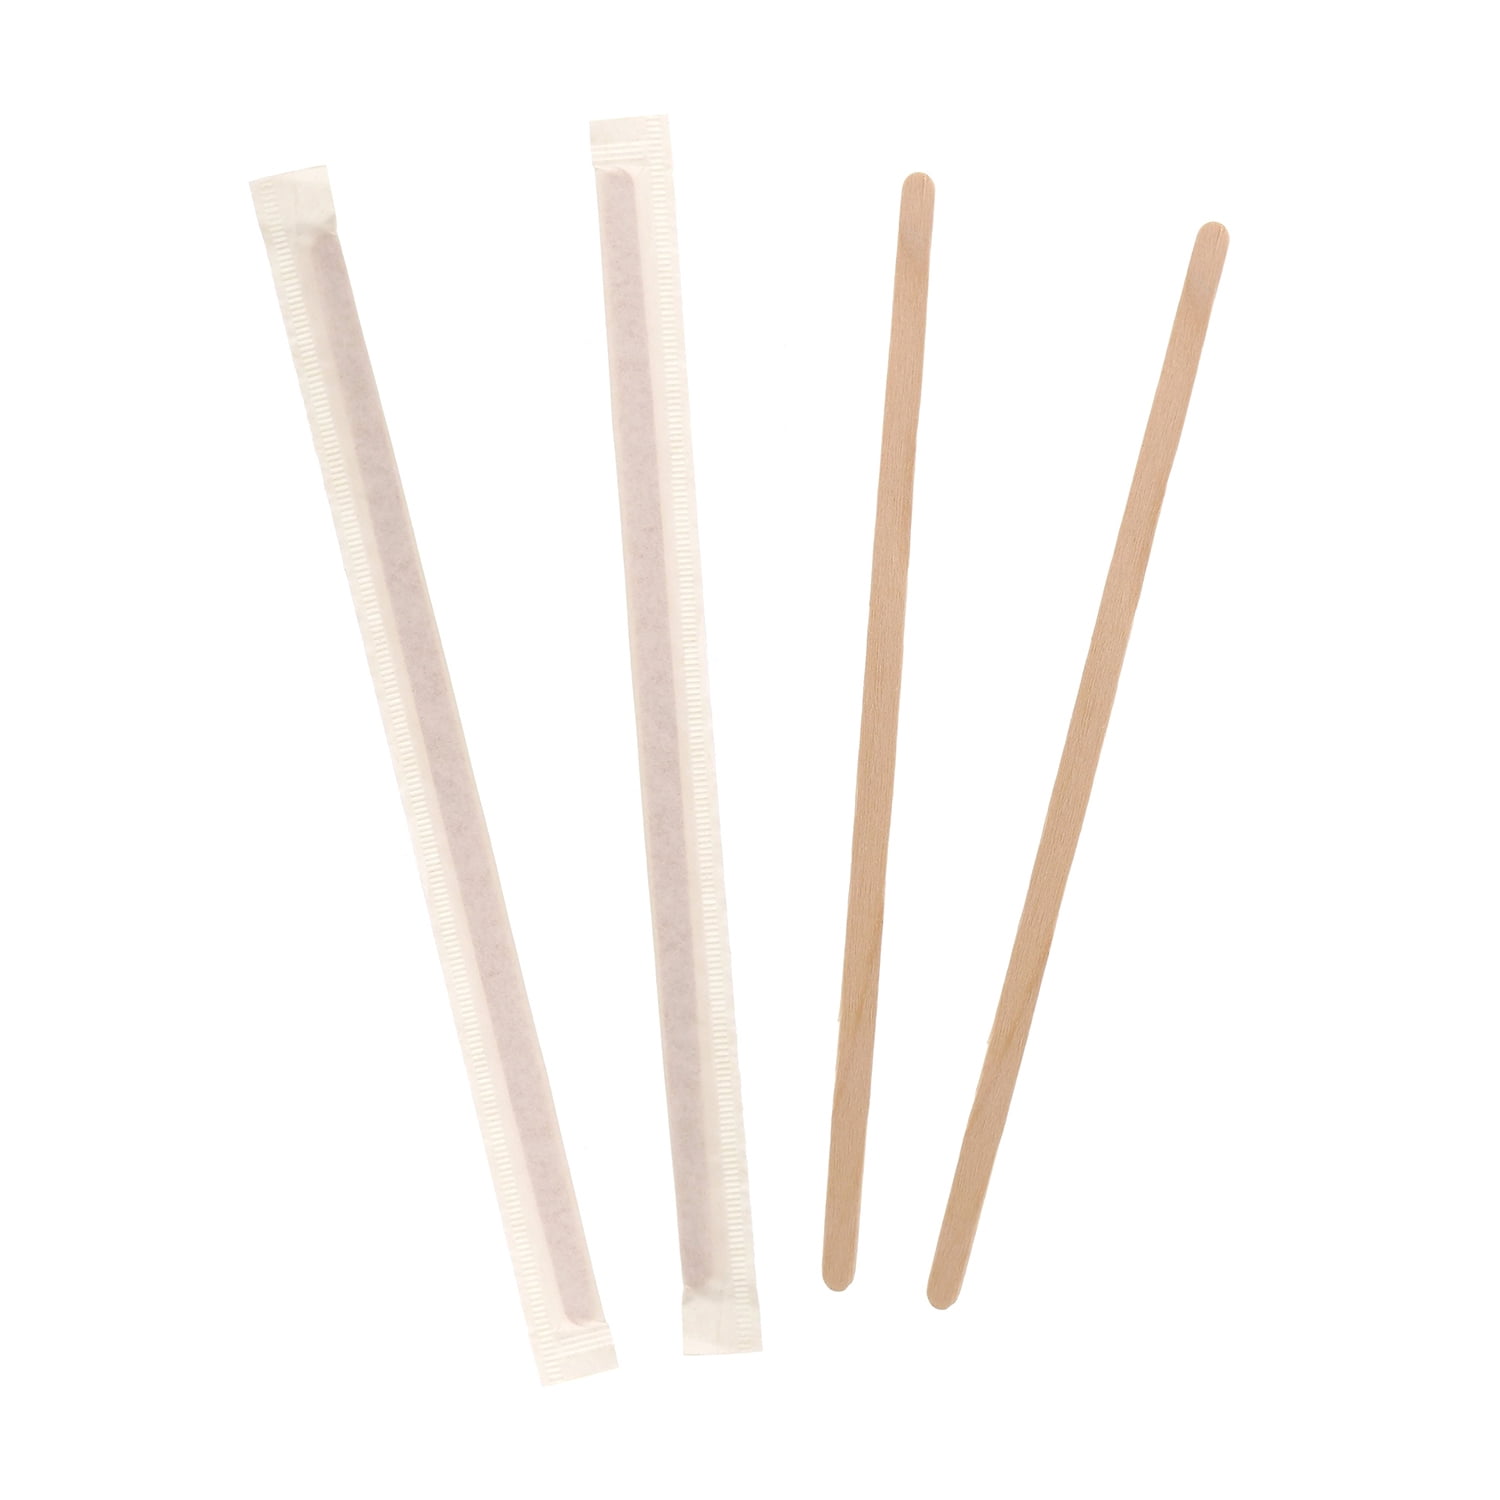 Details about   Wooden Coffee Stirrers RY00011 Pack of 1000 